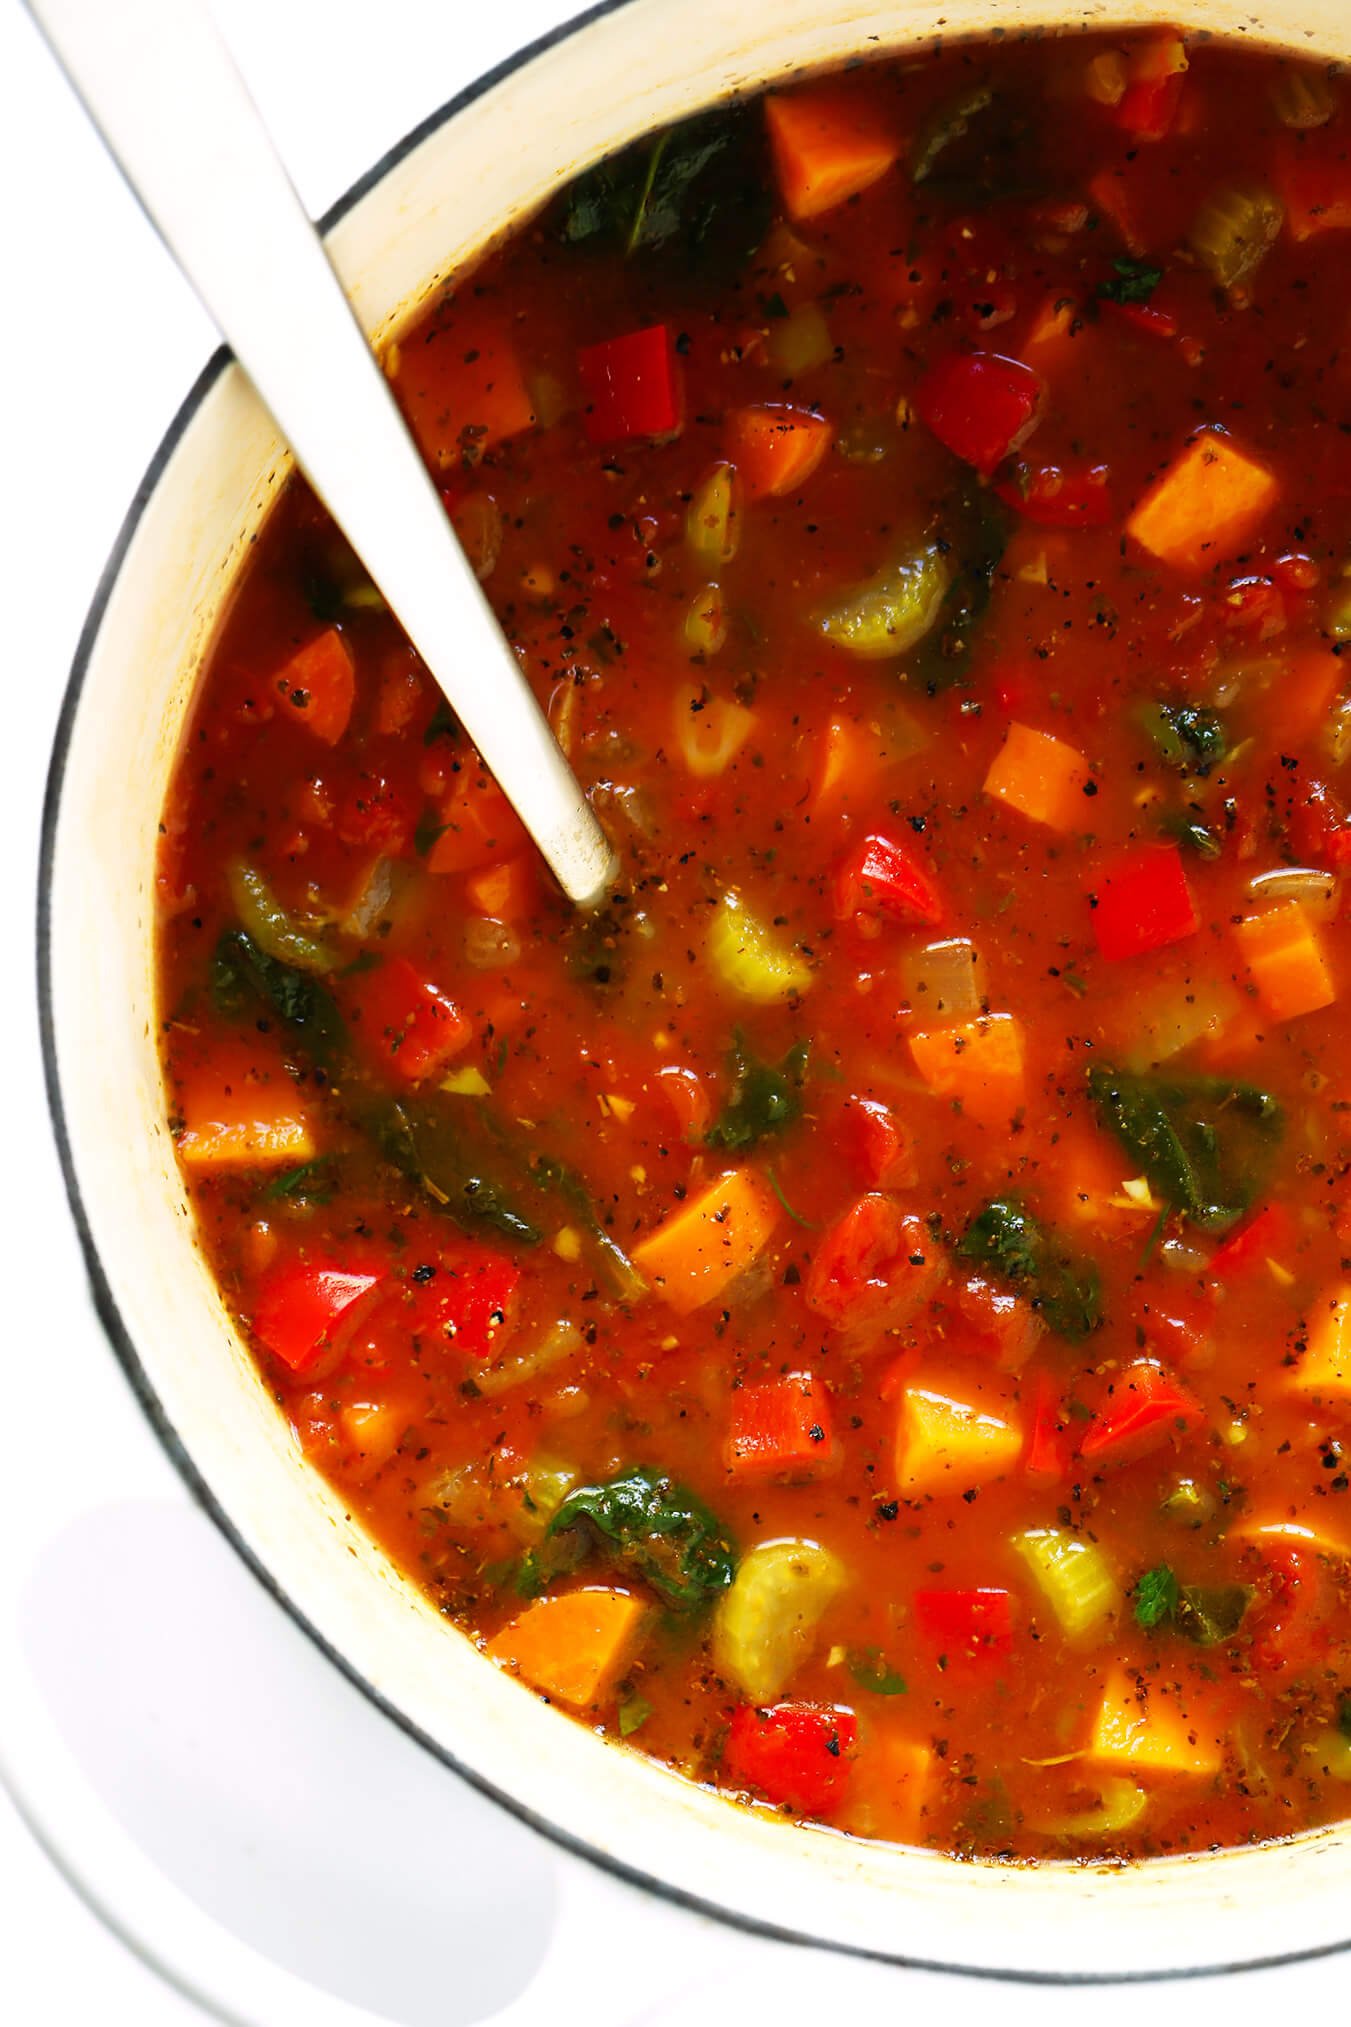 My Favorite Vegetable Soup Recipe | Gimme Some Oven